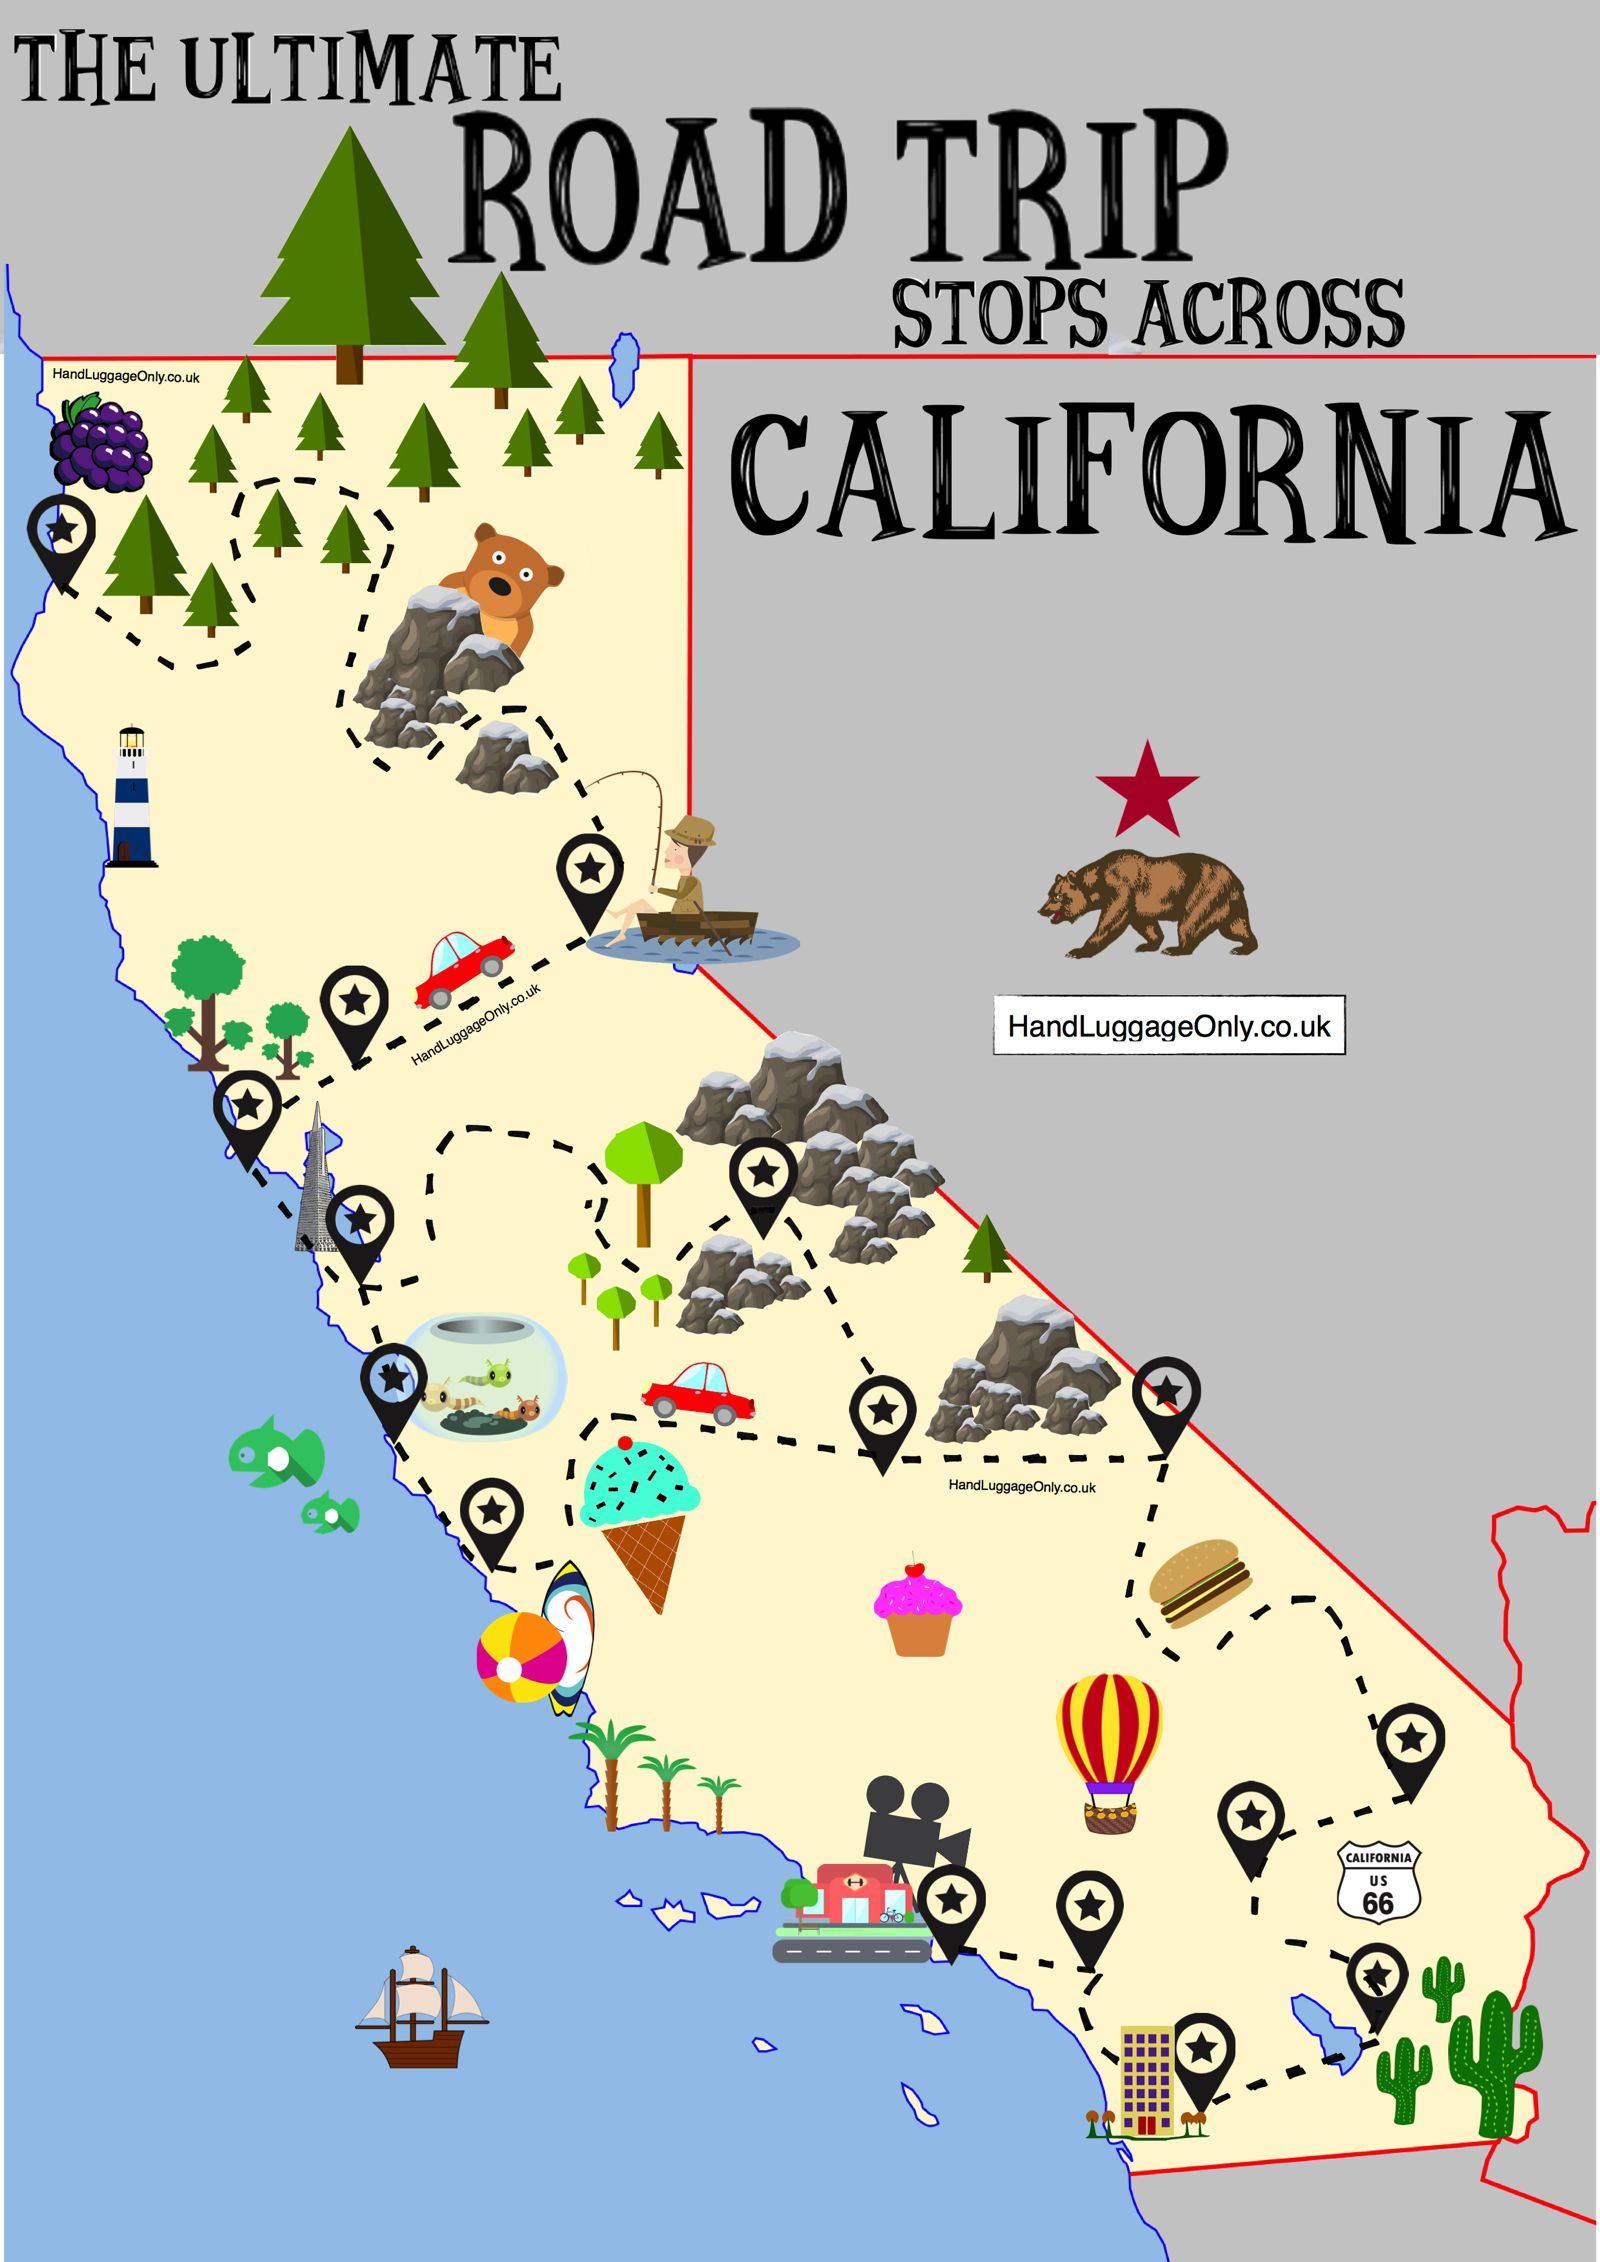 The Ultimate Road Trip Map Of Places To Visit In California - Hand - California Coast Map Road Trip